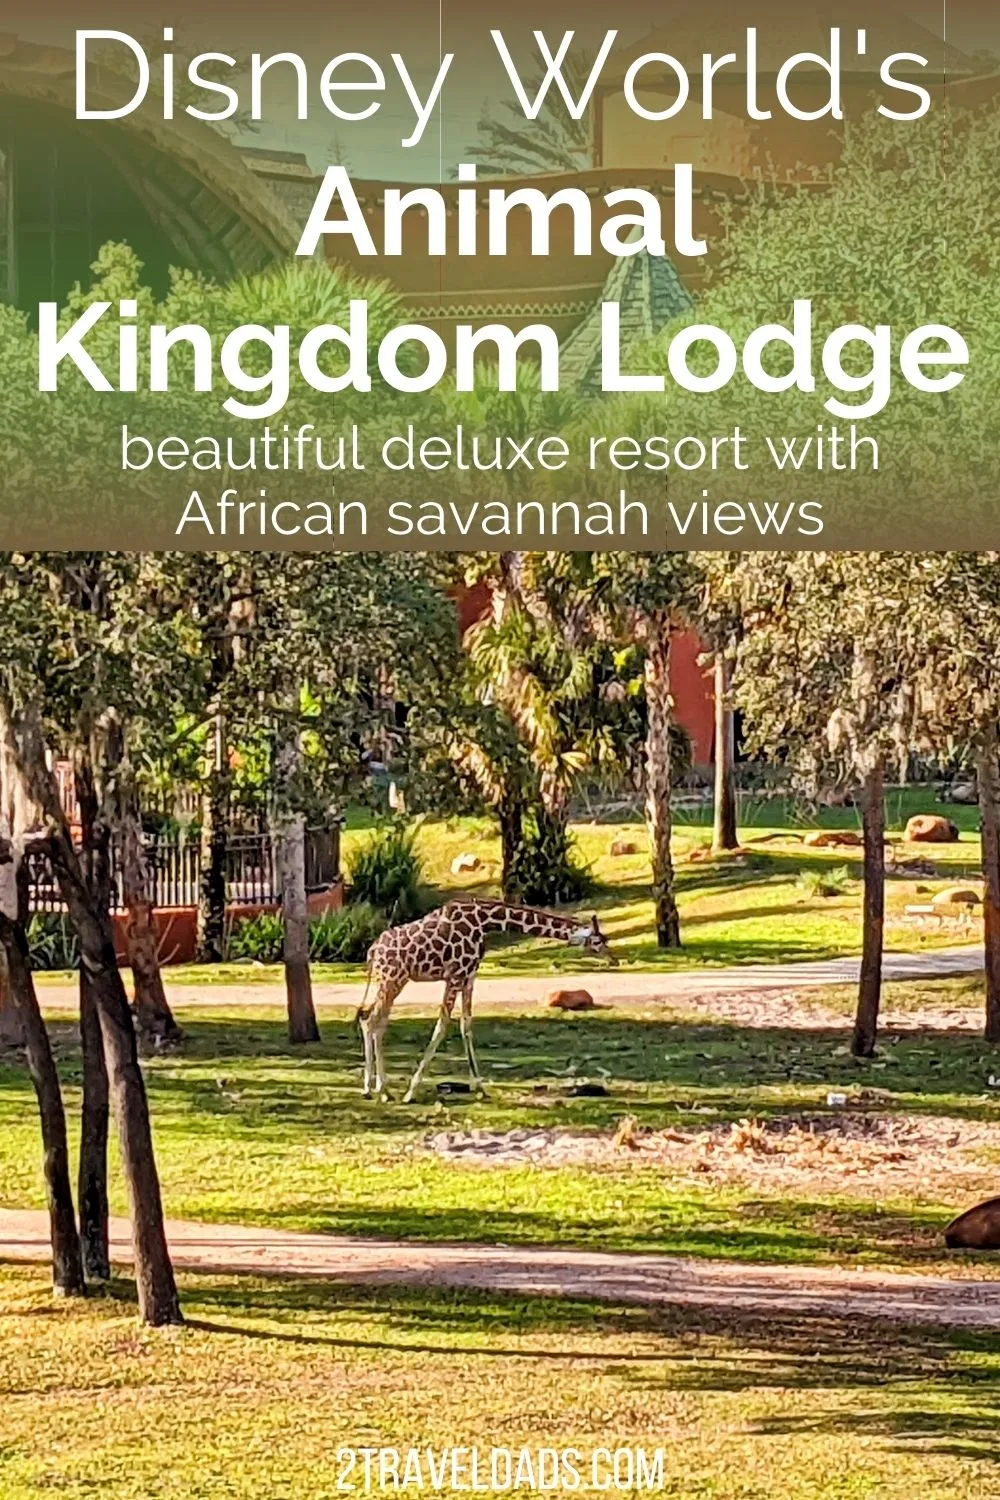 Staying at Disney's Animal Kingdom Lodge is a unique experience at Walt Disney World and one to add to your bucket list. Review of the Lodge, tips for booking, and everything you need to know about staying near Animal Kingdom.